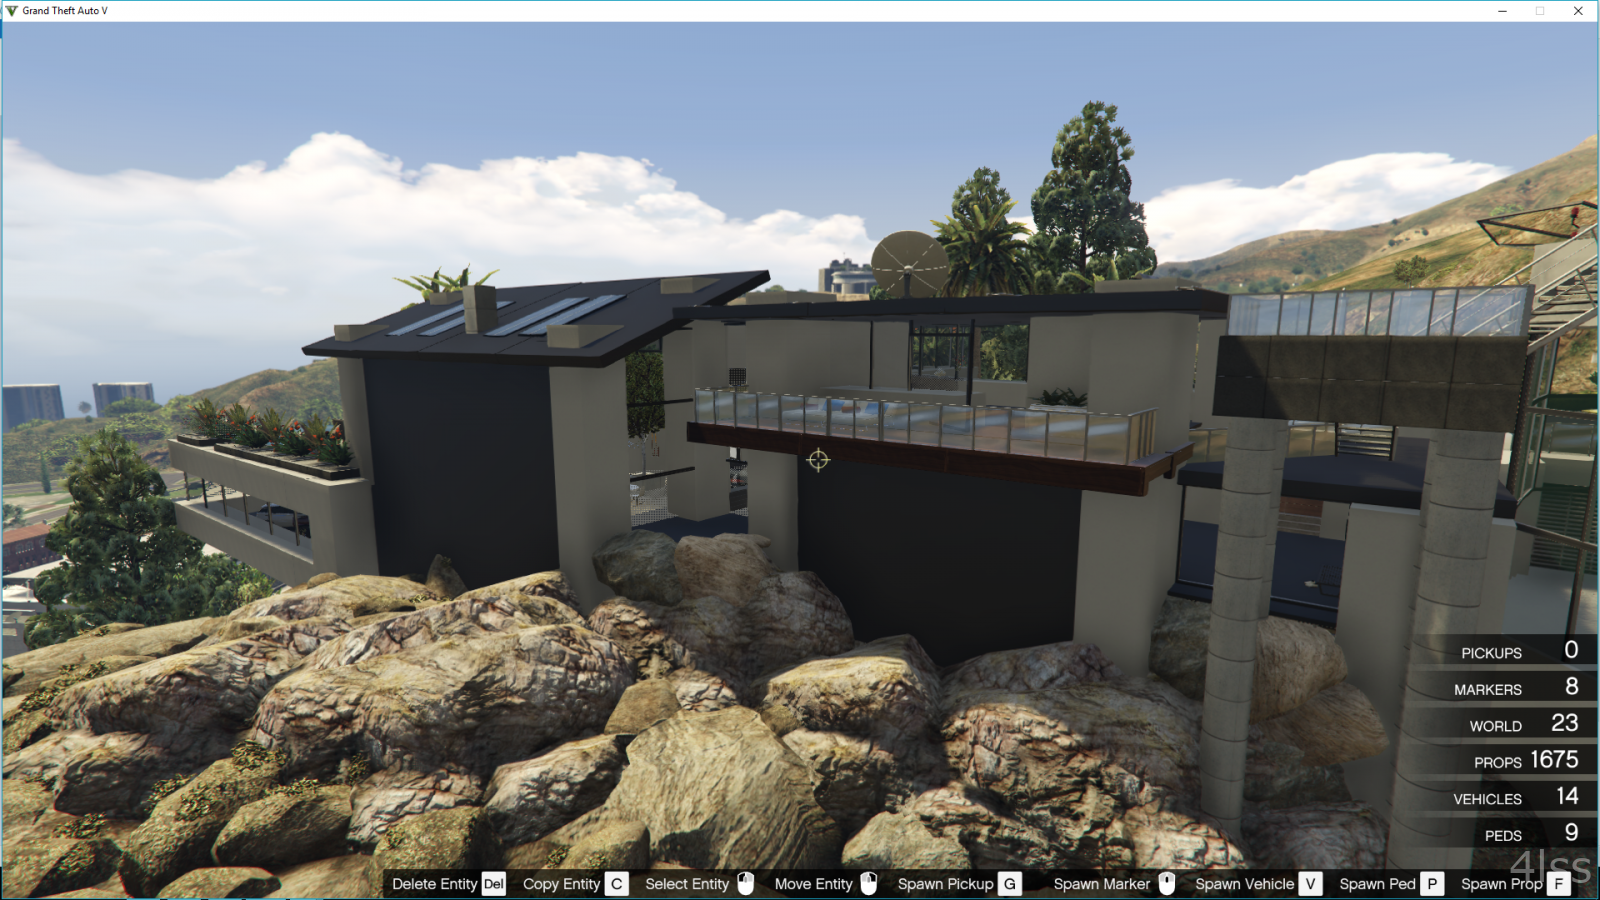 Most Expensive House In Gta 5 Online Most Expensive House in Los Santos [Map Editor] - GTA5-Mods.com